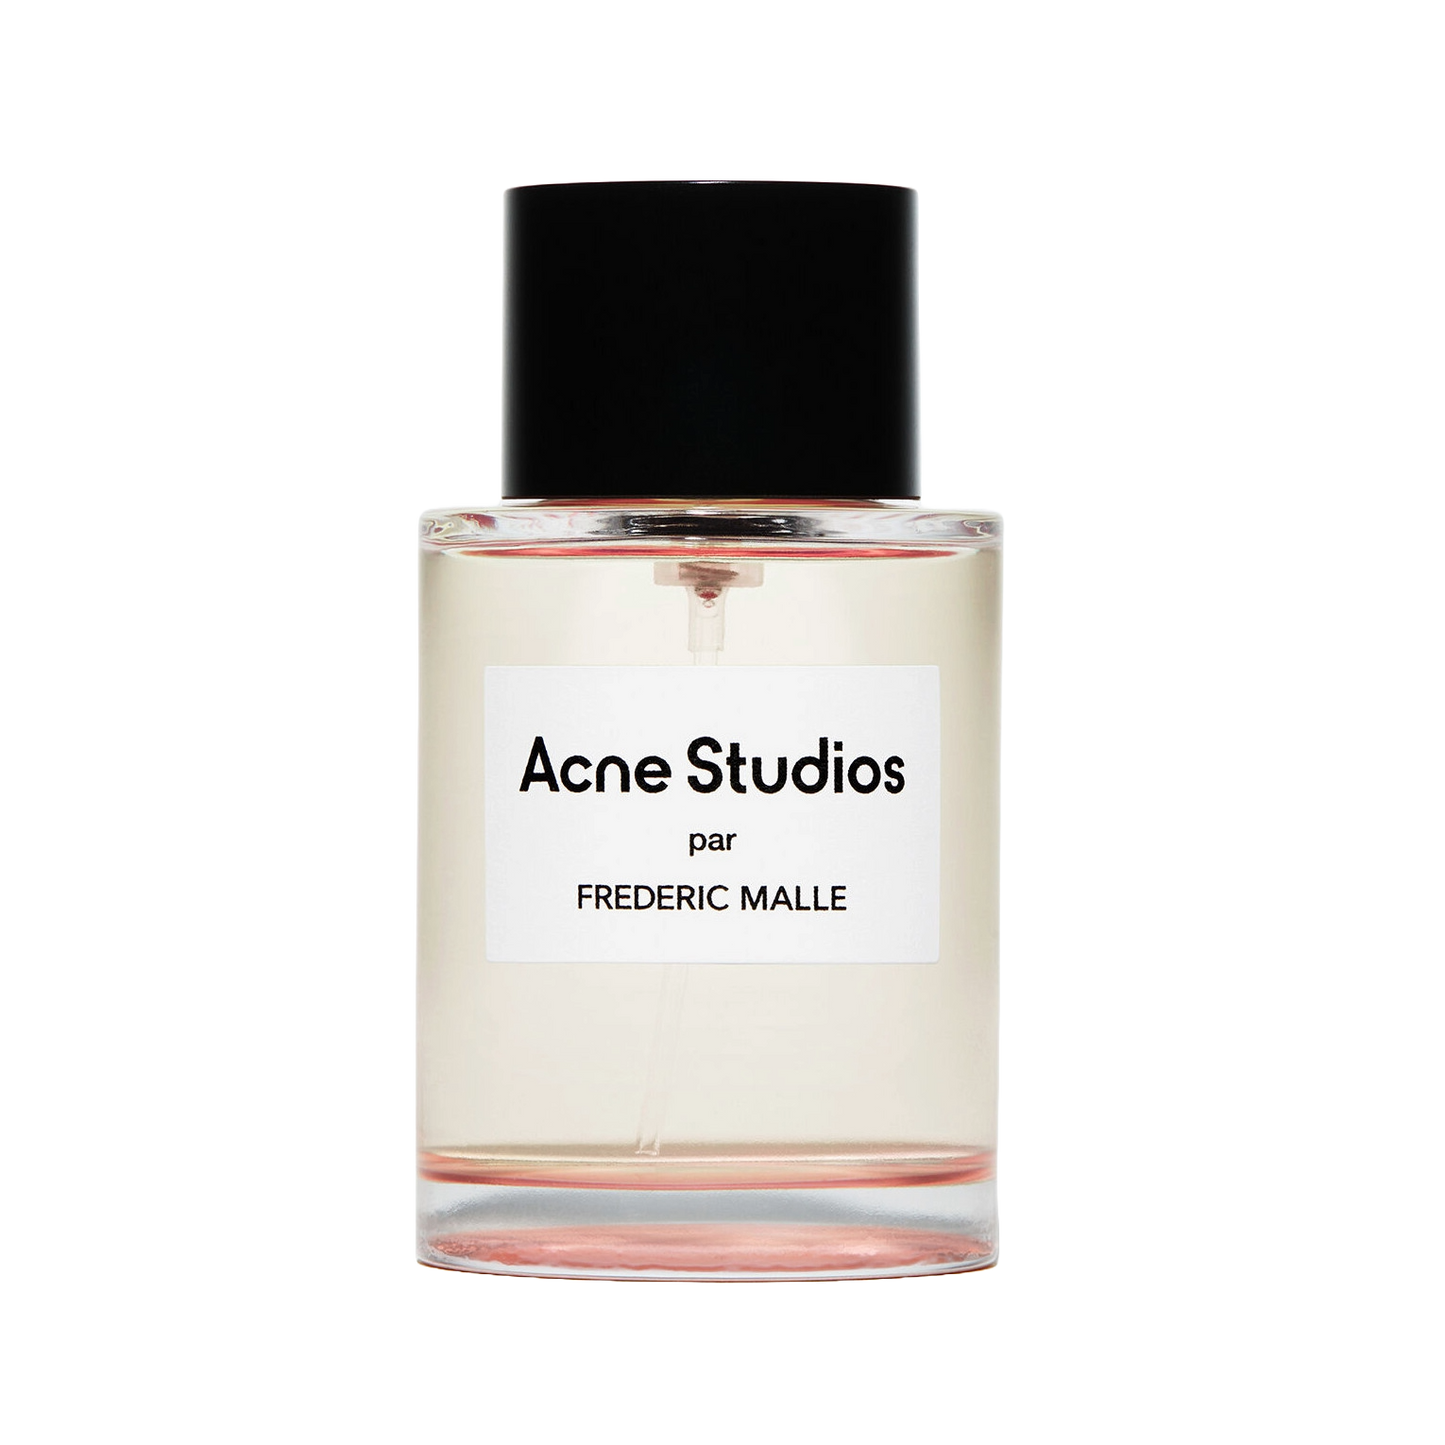 Frederic Malle Acne Studios Samples Decants